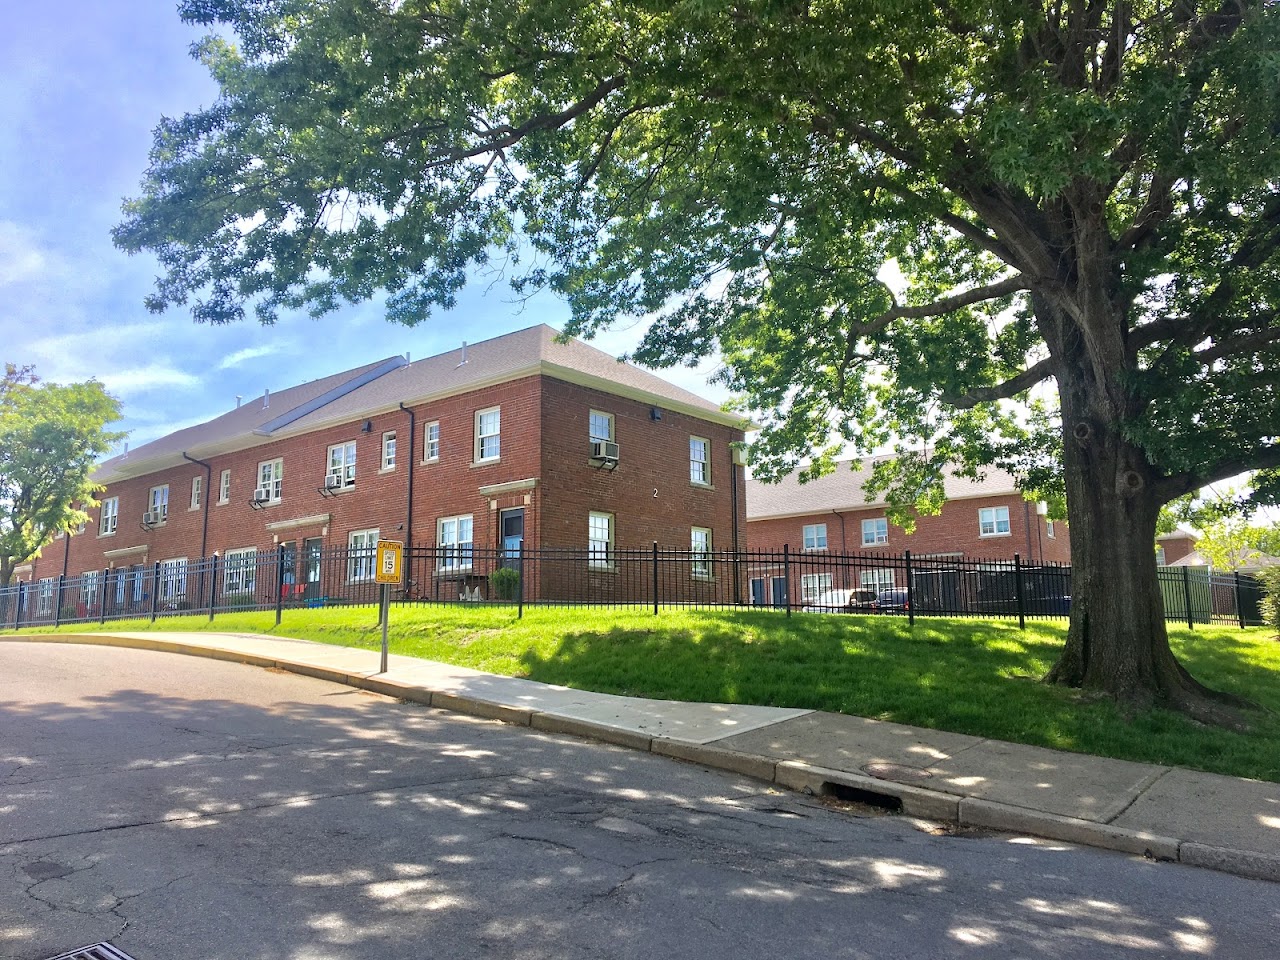 Photo of PROSPECT HEIGHTS II. Affordable housing located at PROSPECT STREET PAWTUCKET, RI 02860